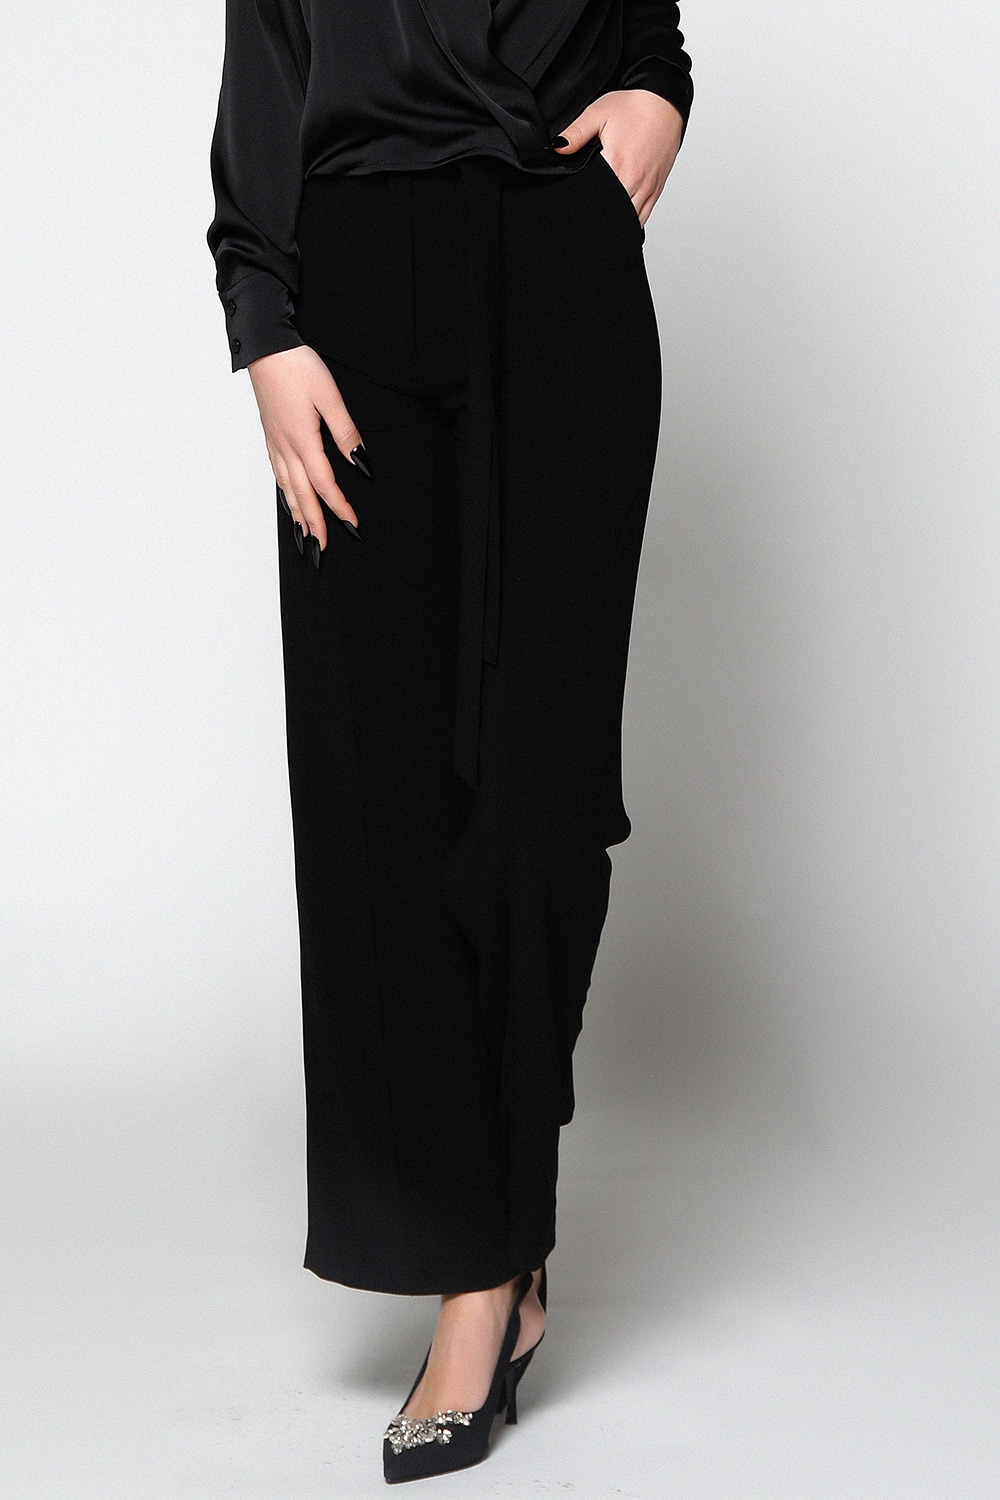 Black georgette pants with belt and pockets